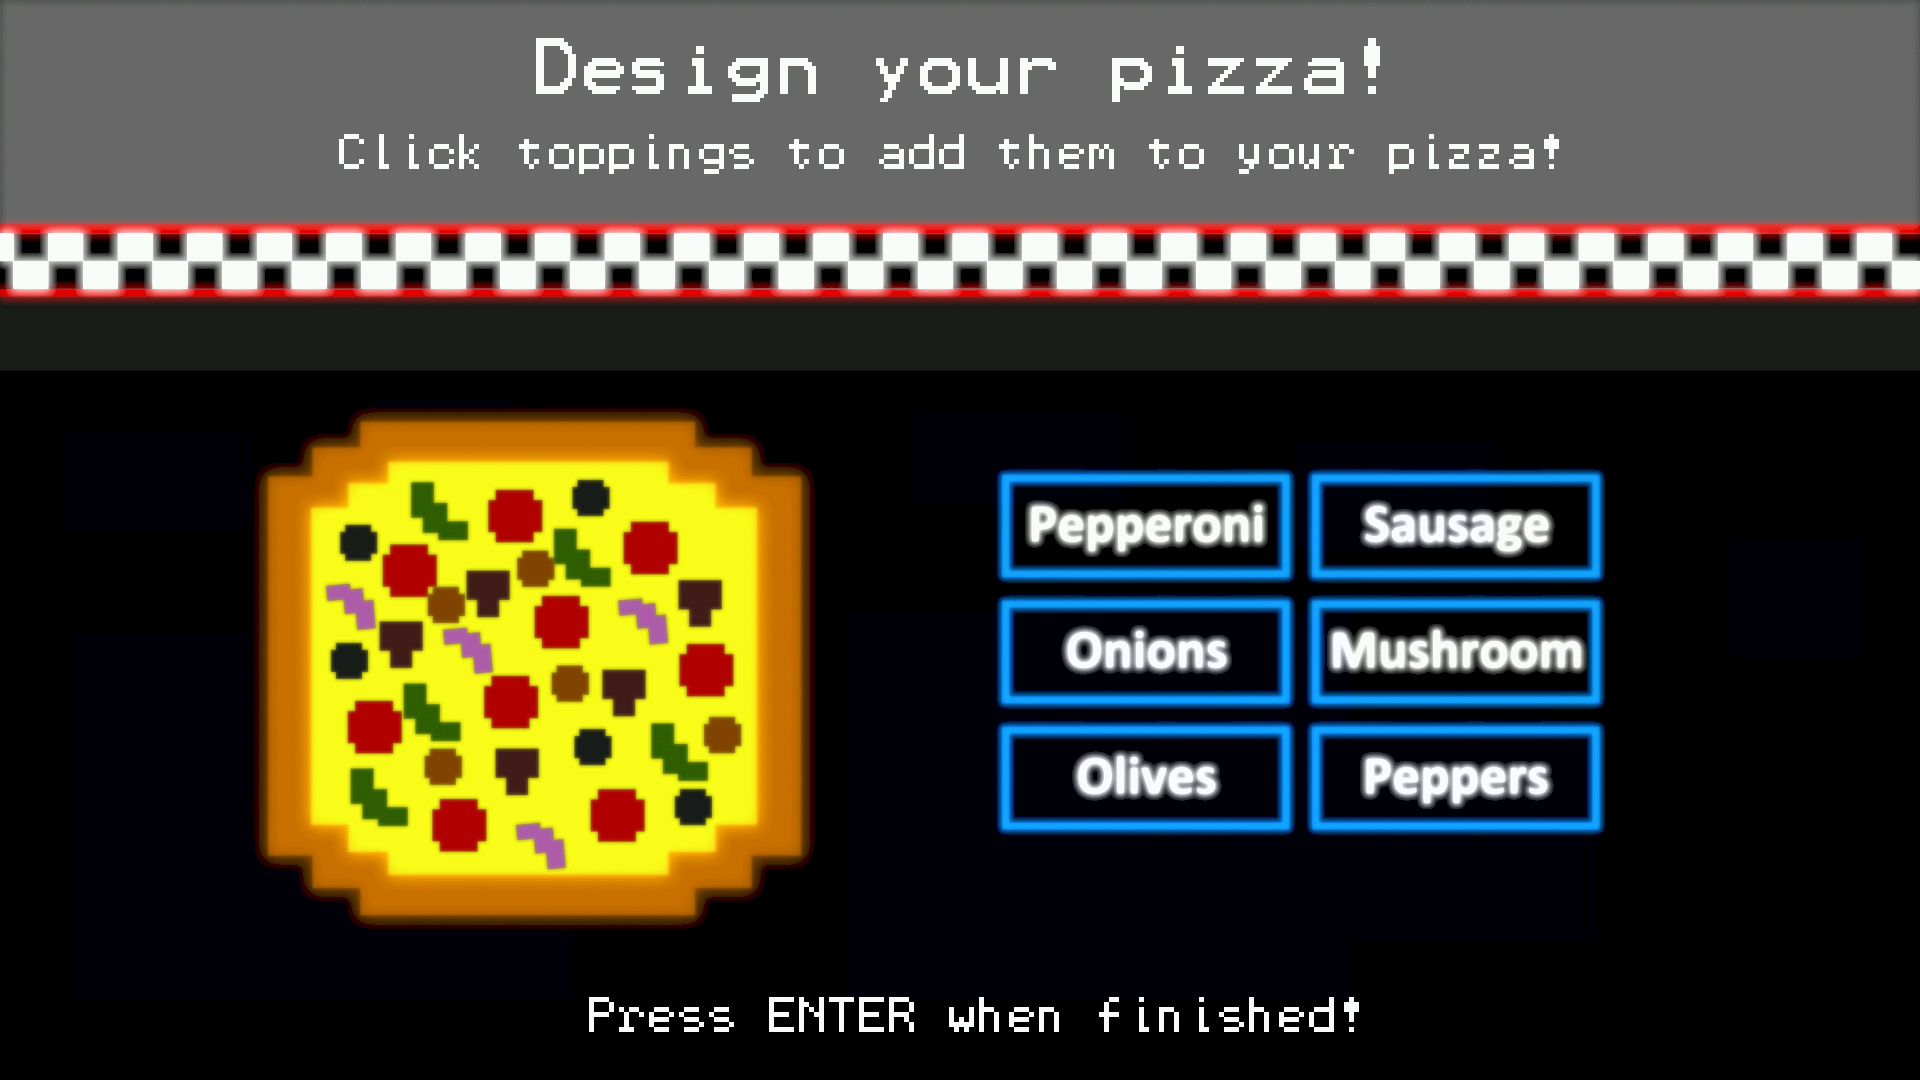 IS THIS FNAF 6?!  Five Nights At Freddy's: Pizzeria Simulator